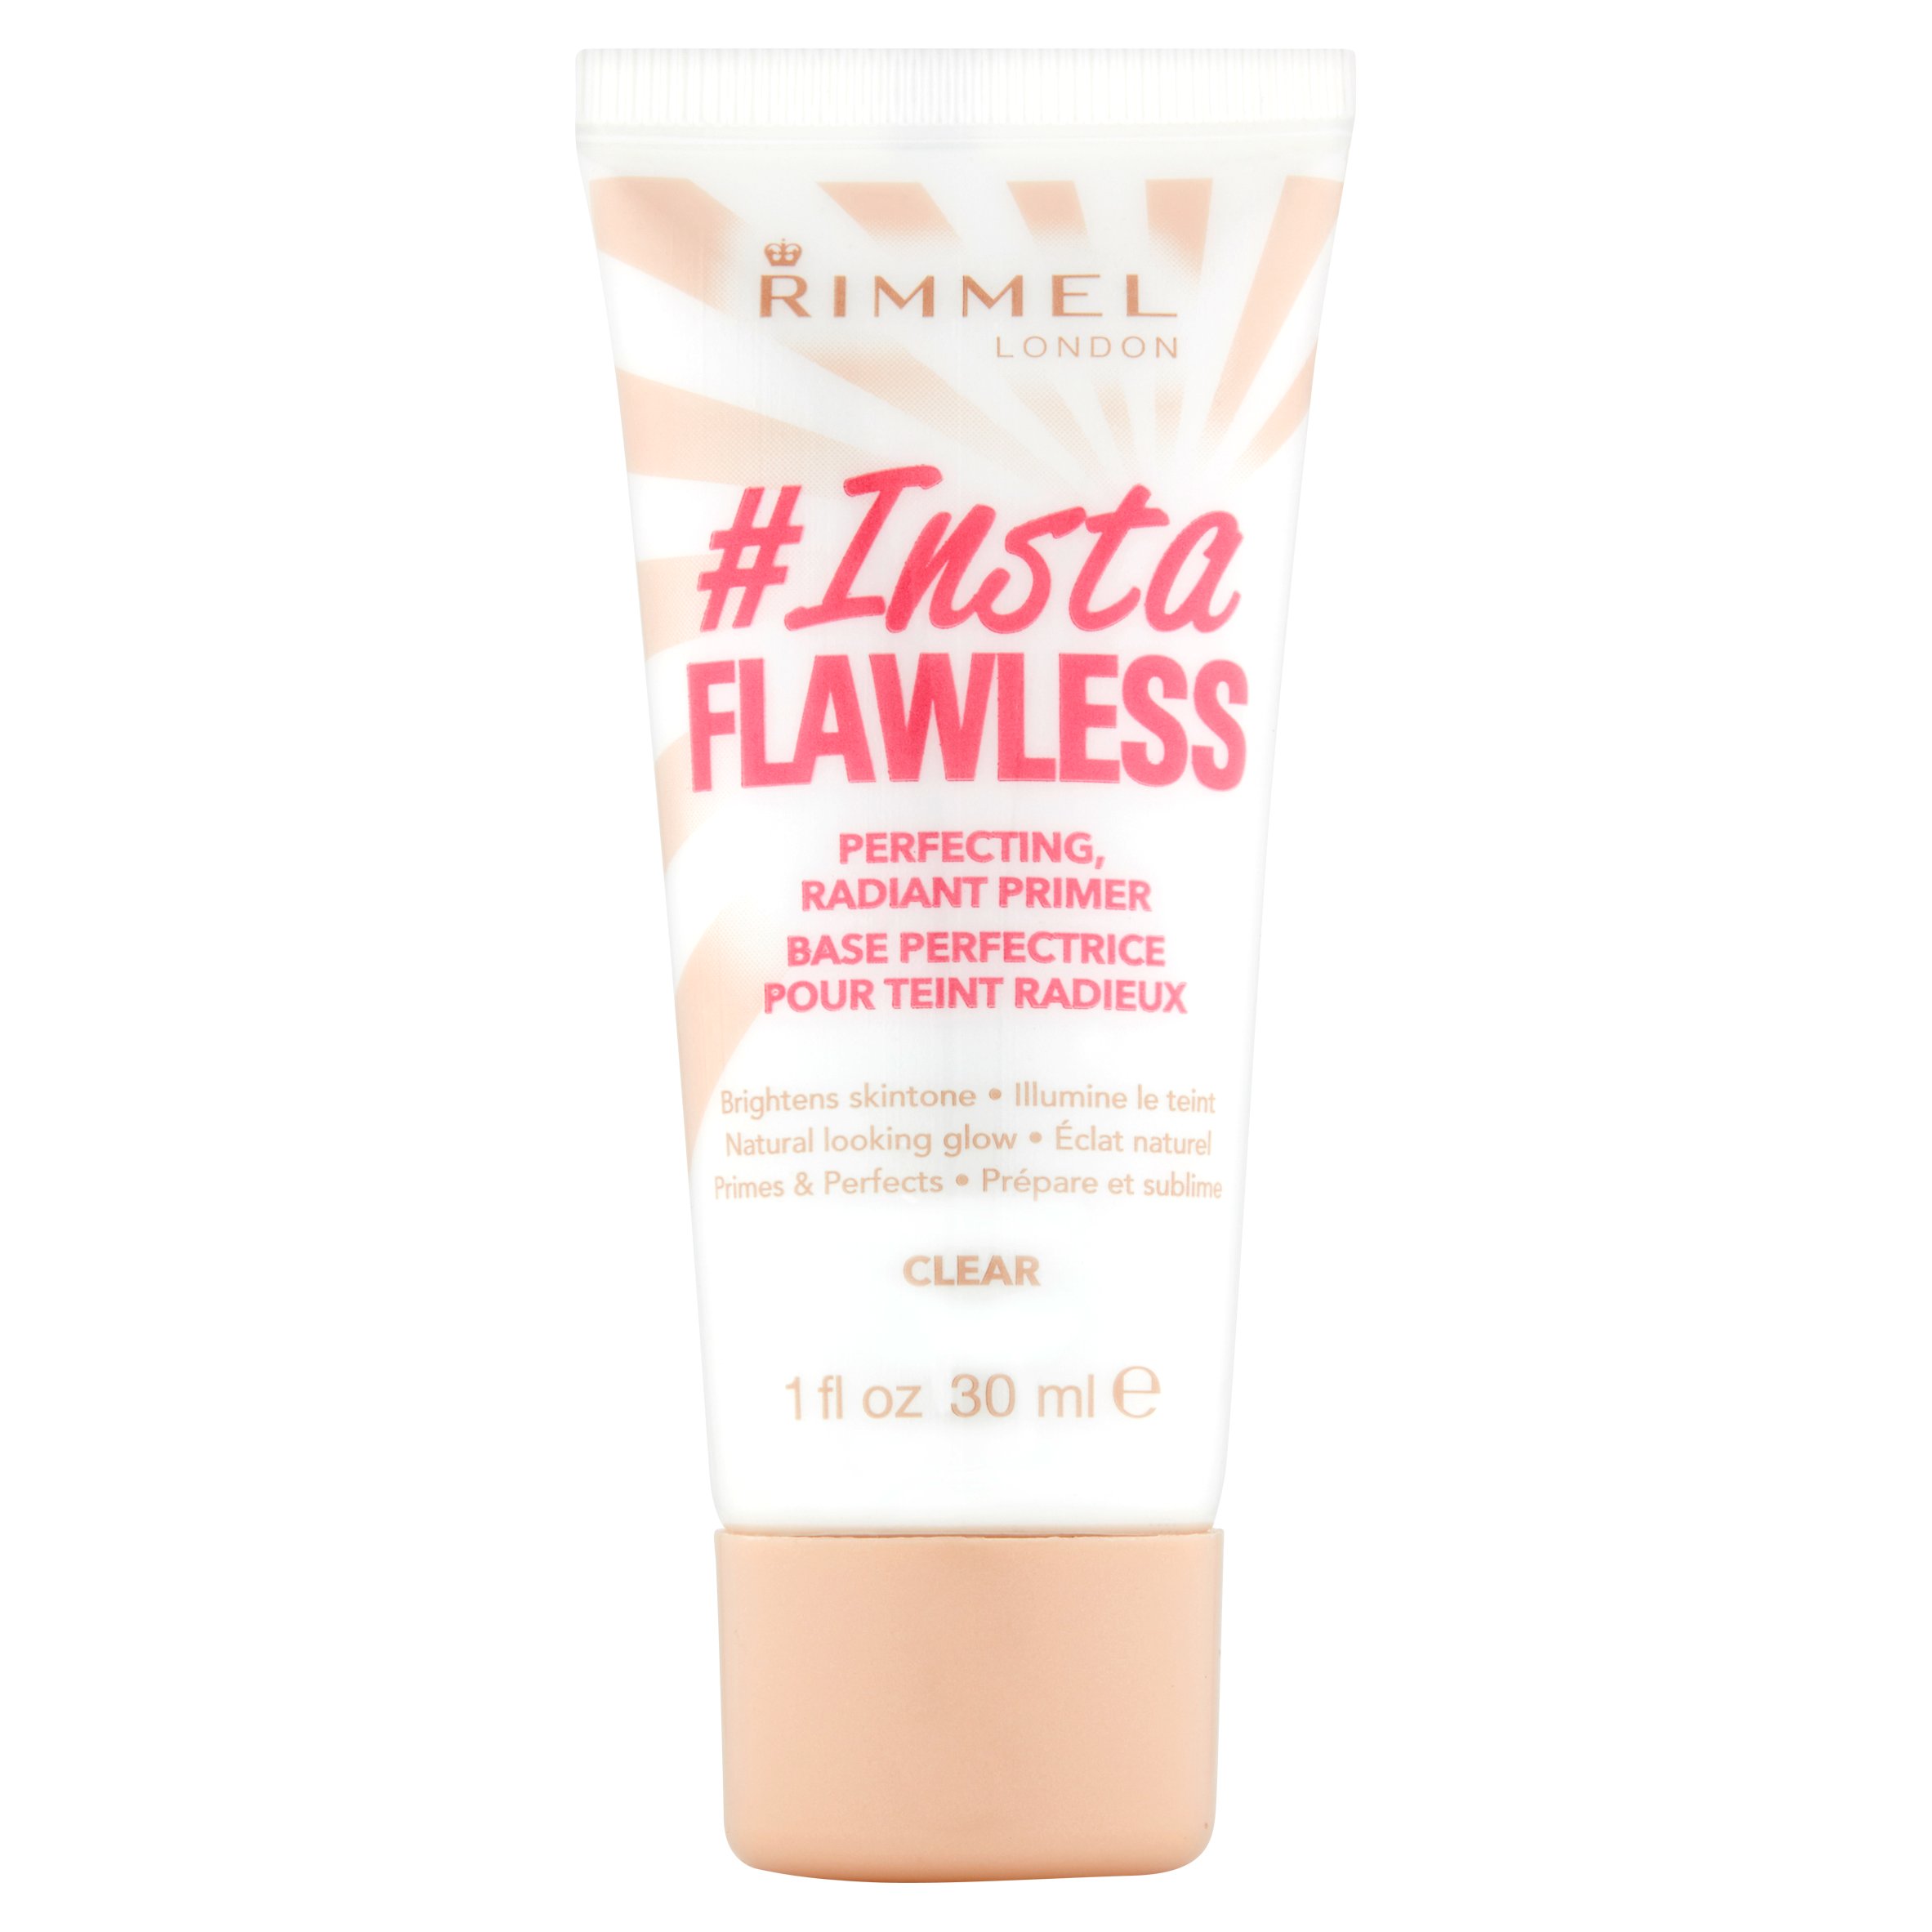 Rimmel London #Insta Flawless Perfecting Radiant Primer, Clear - image 1 of 4